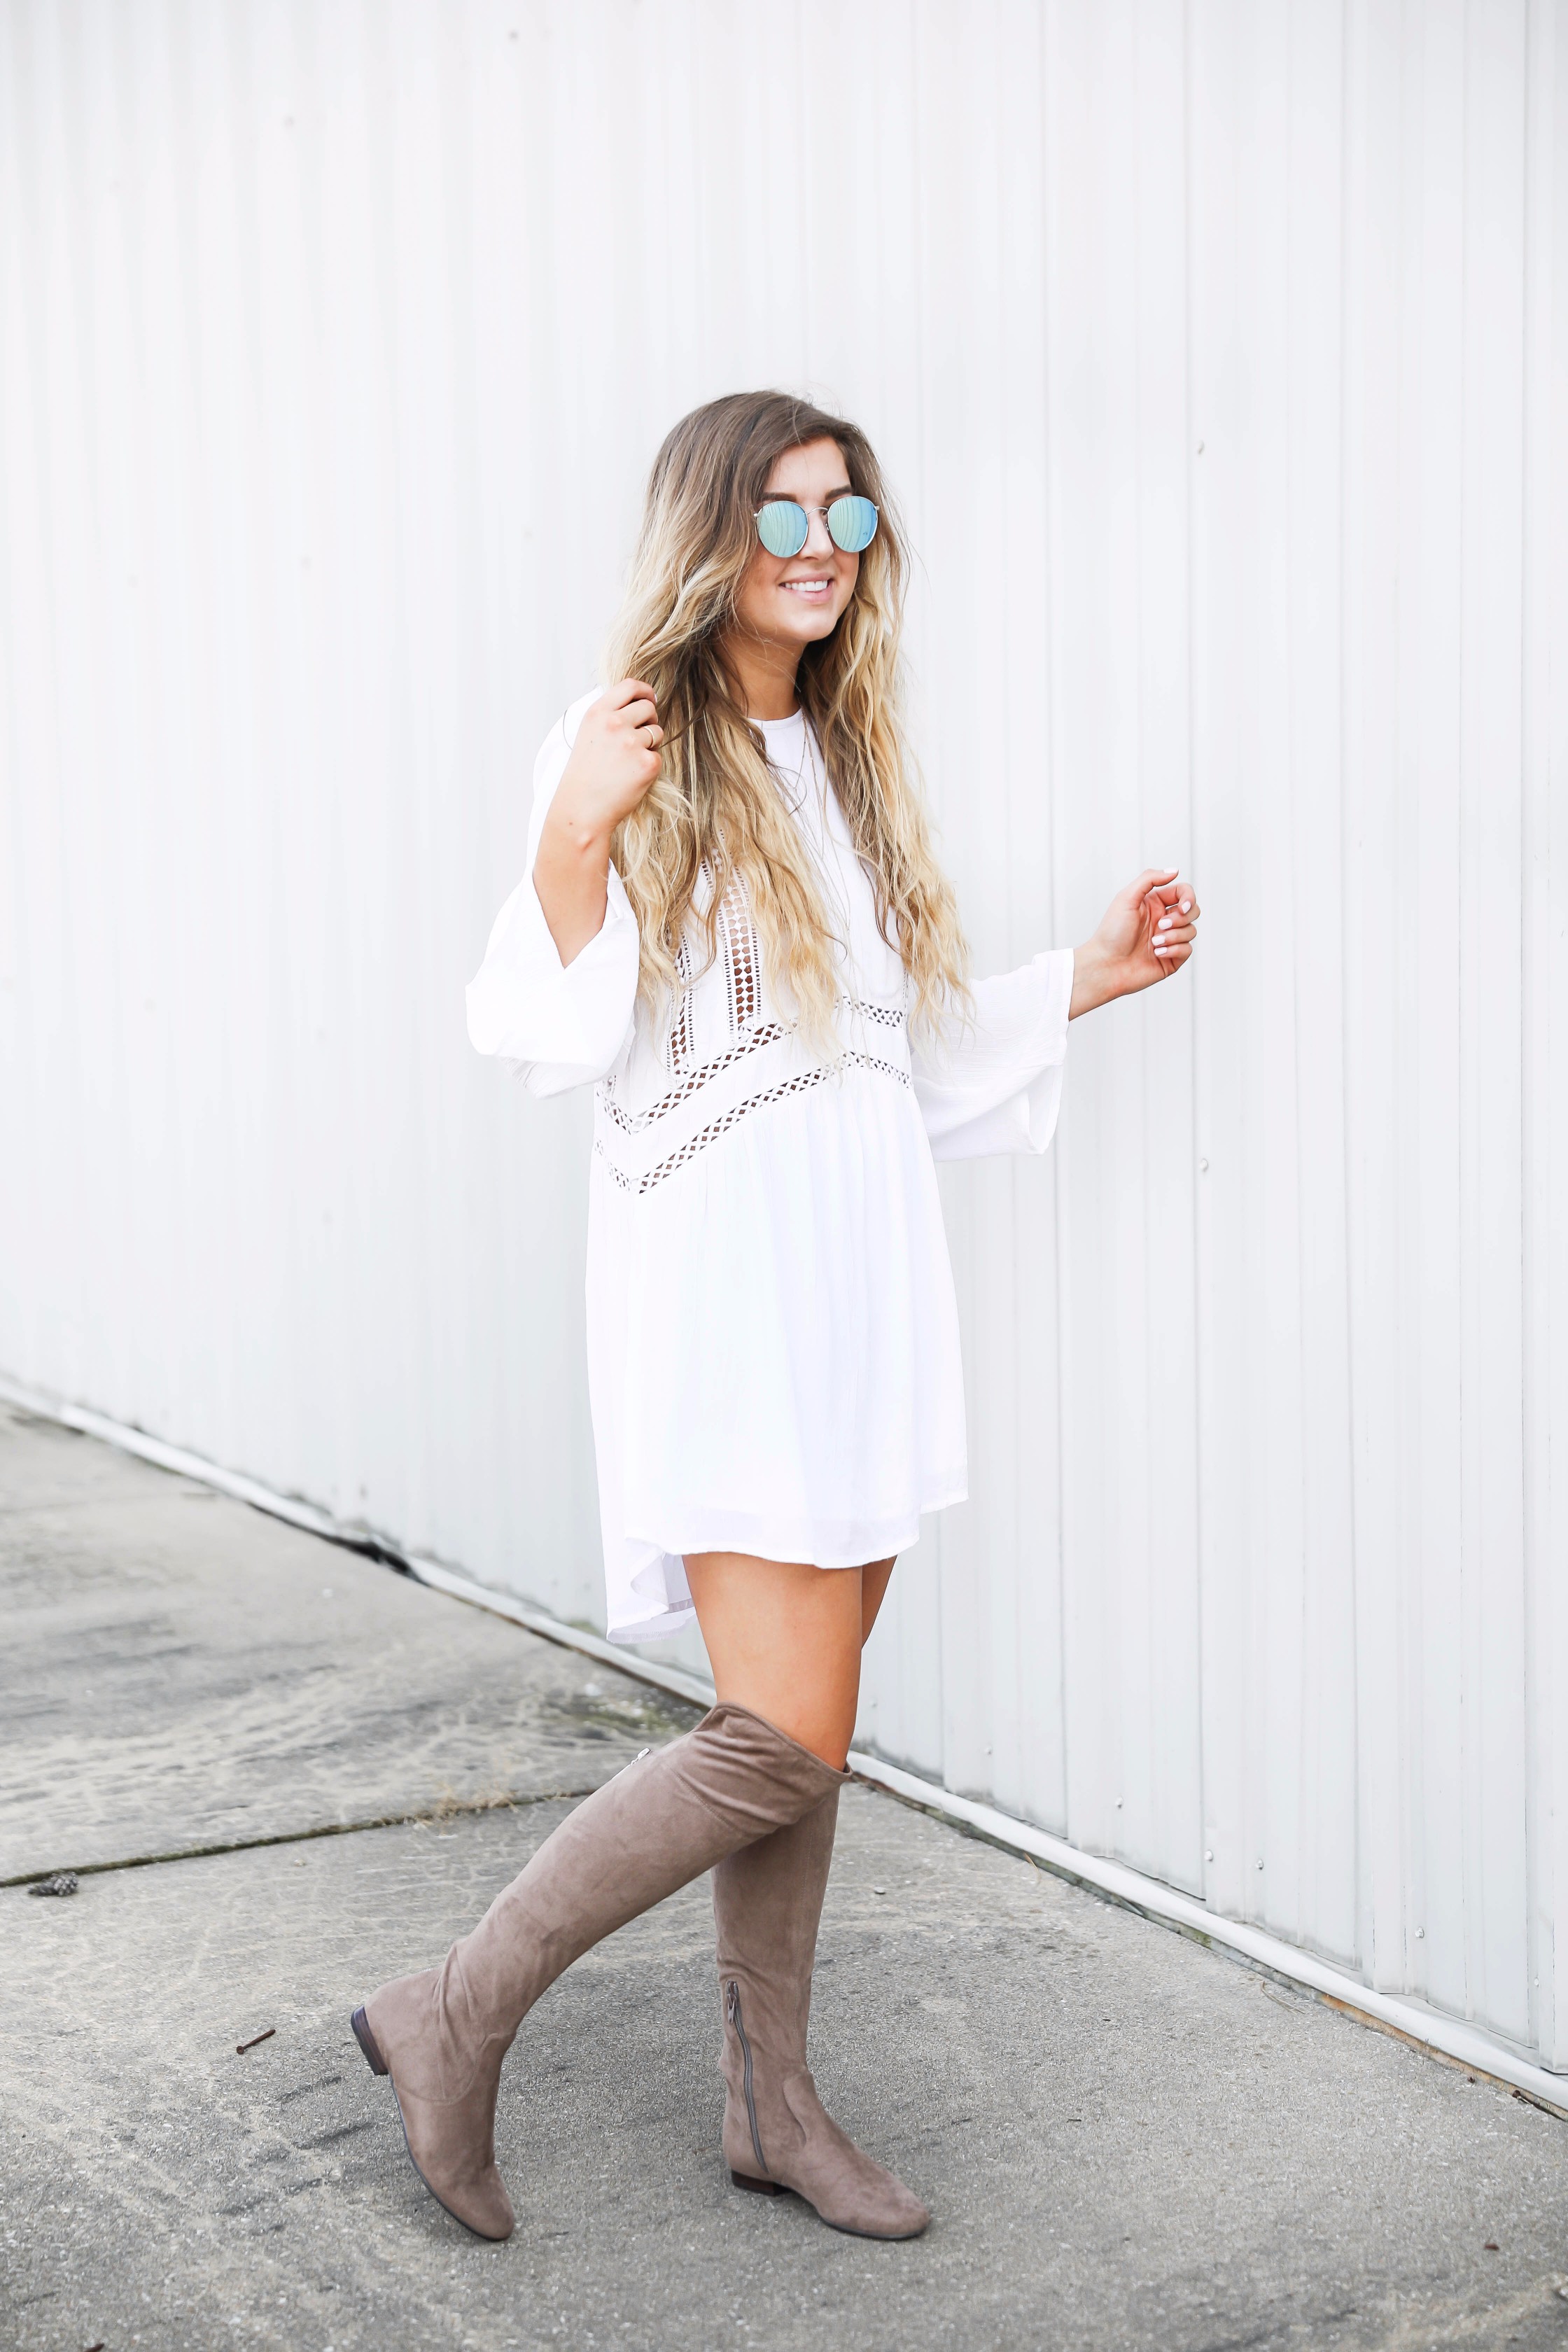 White boho cutout dress with over the knee light brown suede boots! Paired with light blue circle sunglasses. Such a cute dress for summer going into fall! Find the details on fashion blog daily dose of charm by lauren lindmark